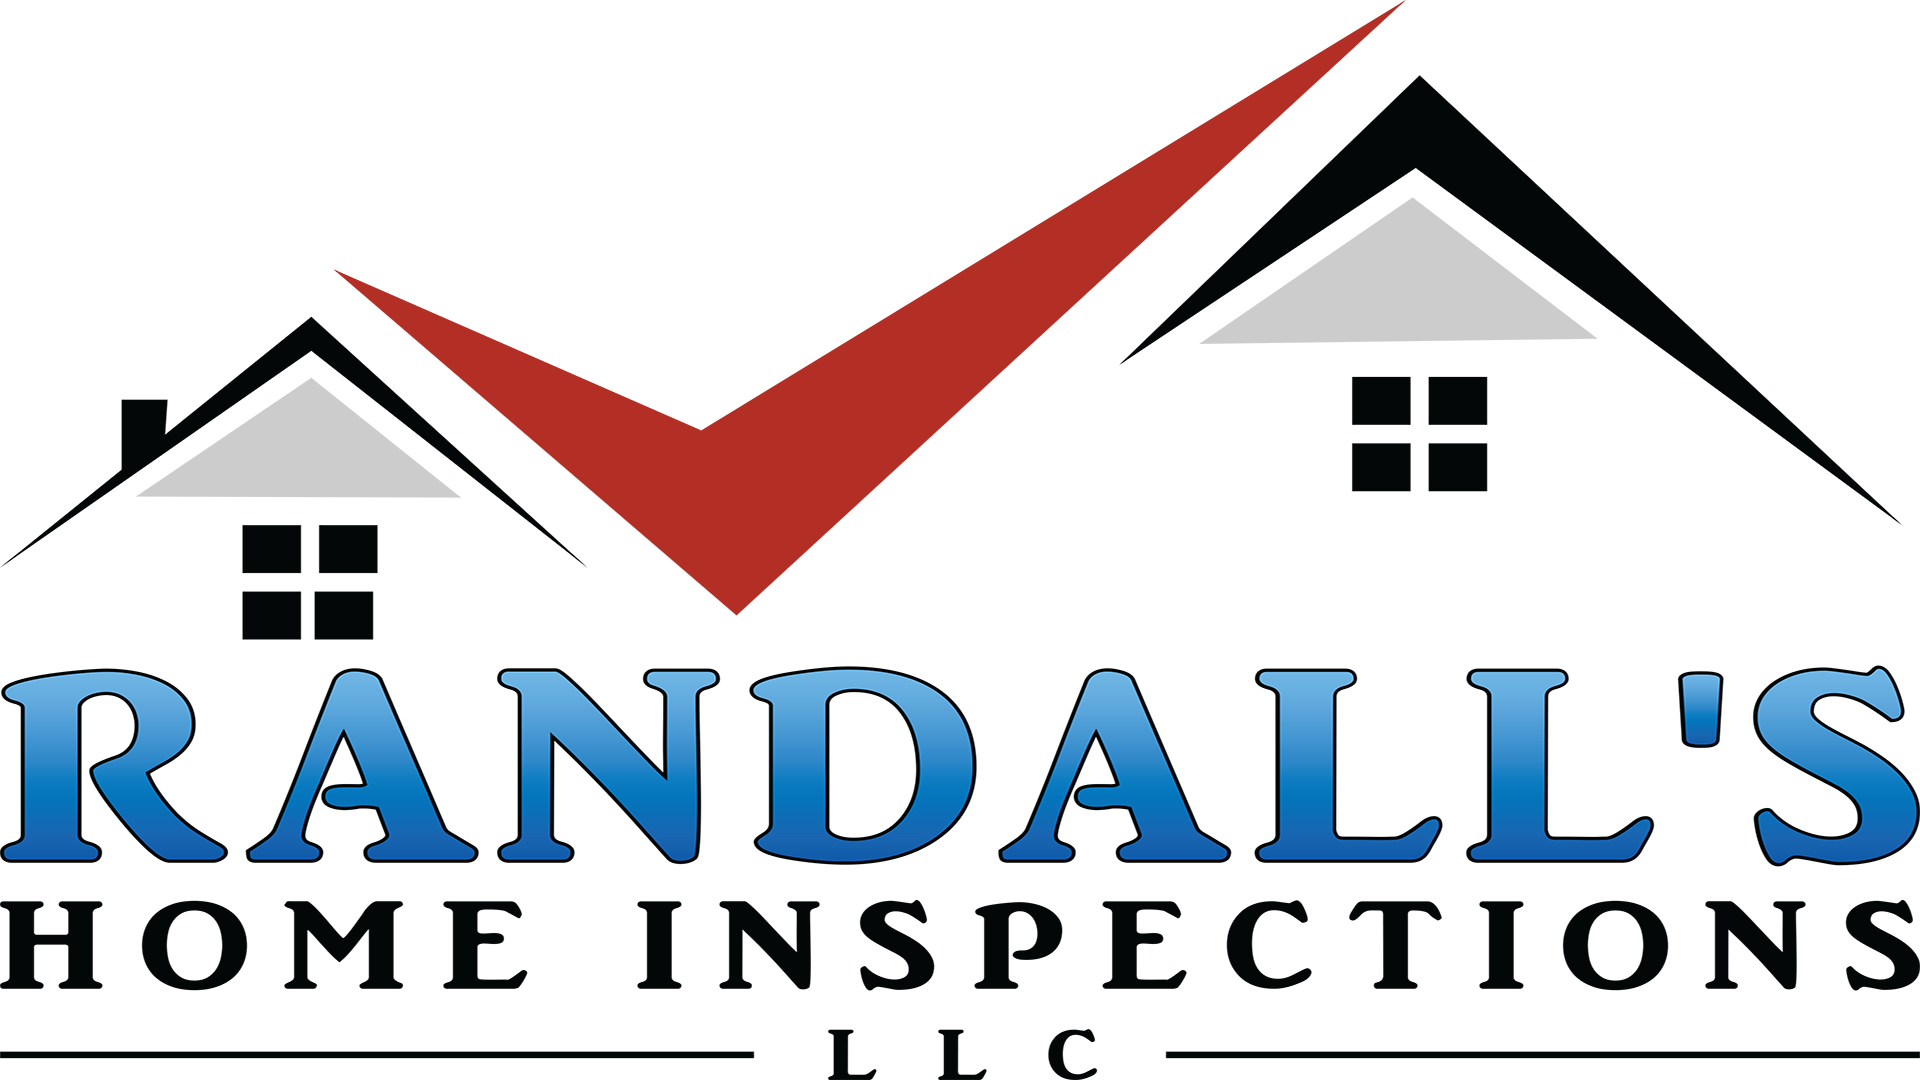 Wisconsin Home Inspection Services You Can Count On - Randall's Home Inspection, L.l.c. (1920x1080)